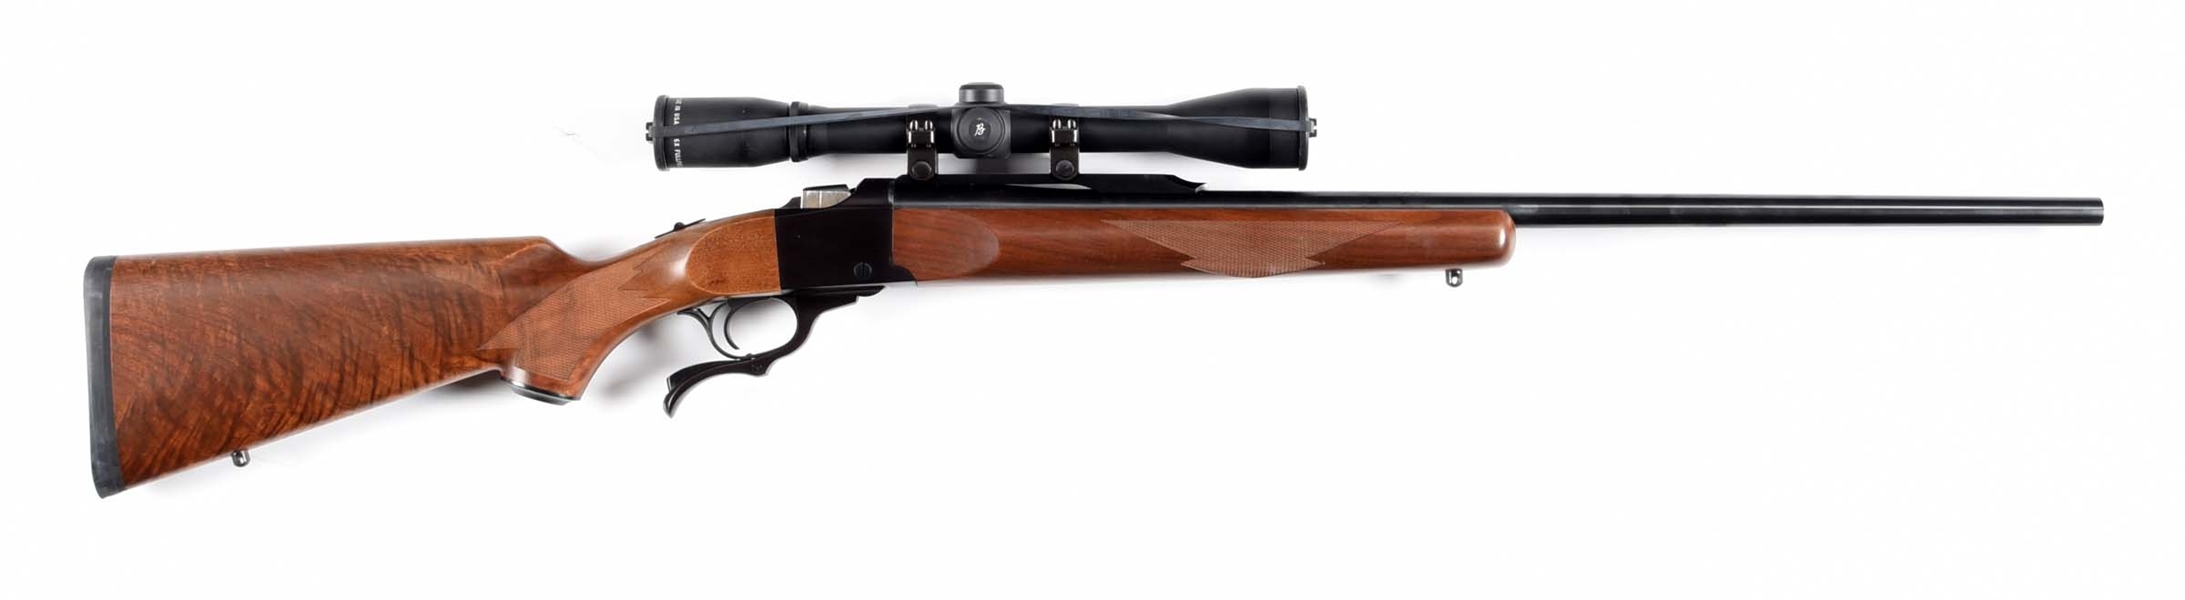 (M) BOXED RUGER NO.1 SINGLE SHOT RIFLE IN .223.